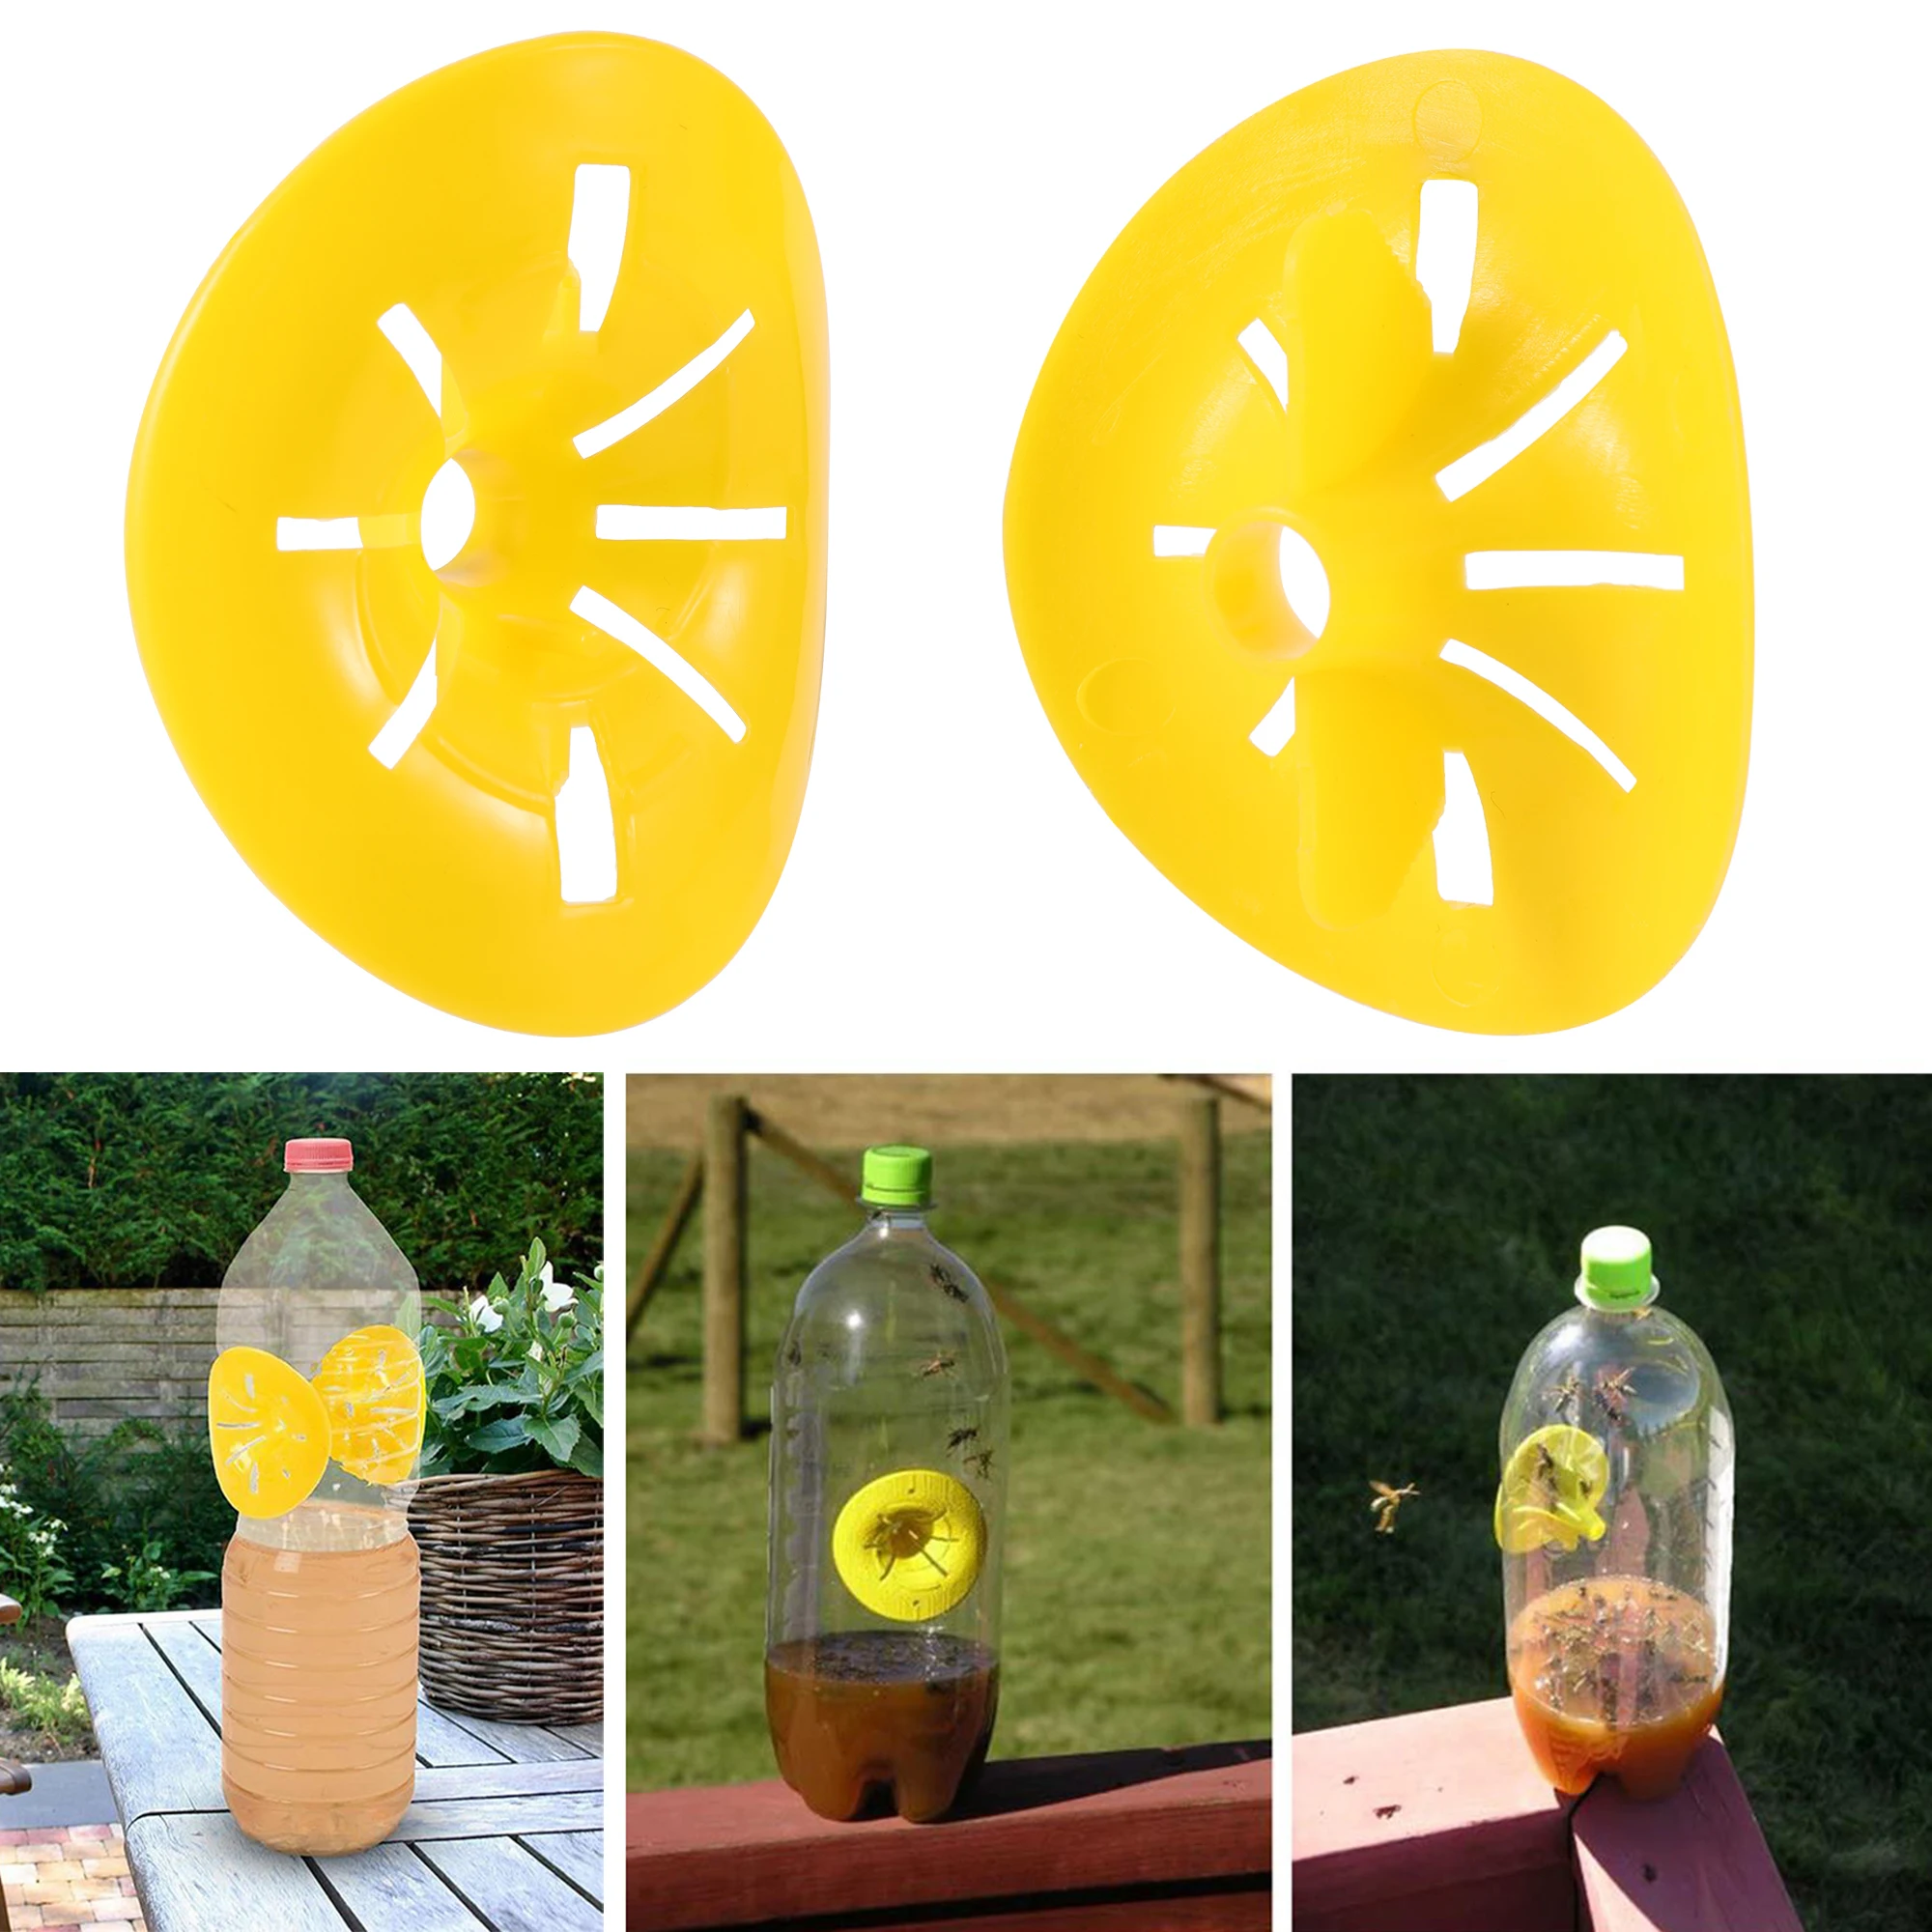 

10Pcs Reusable Bee Catcher Flower Shaped Flying Insects Funnel Pest Wasp Trap Beekeeping Home Garden Trap Bee Hornets Catcher